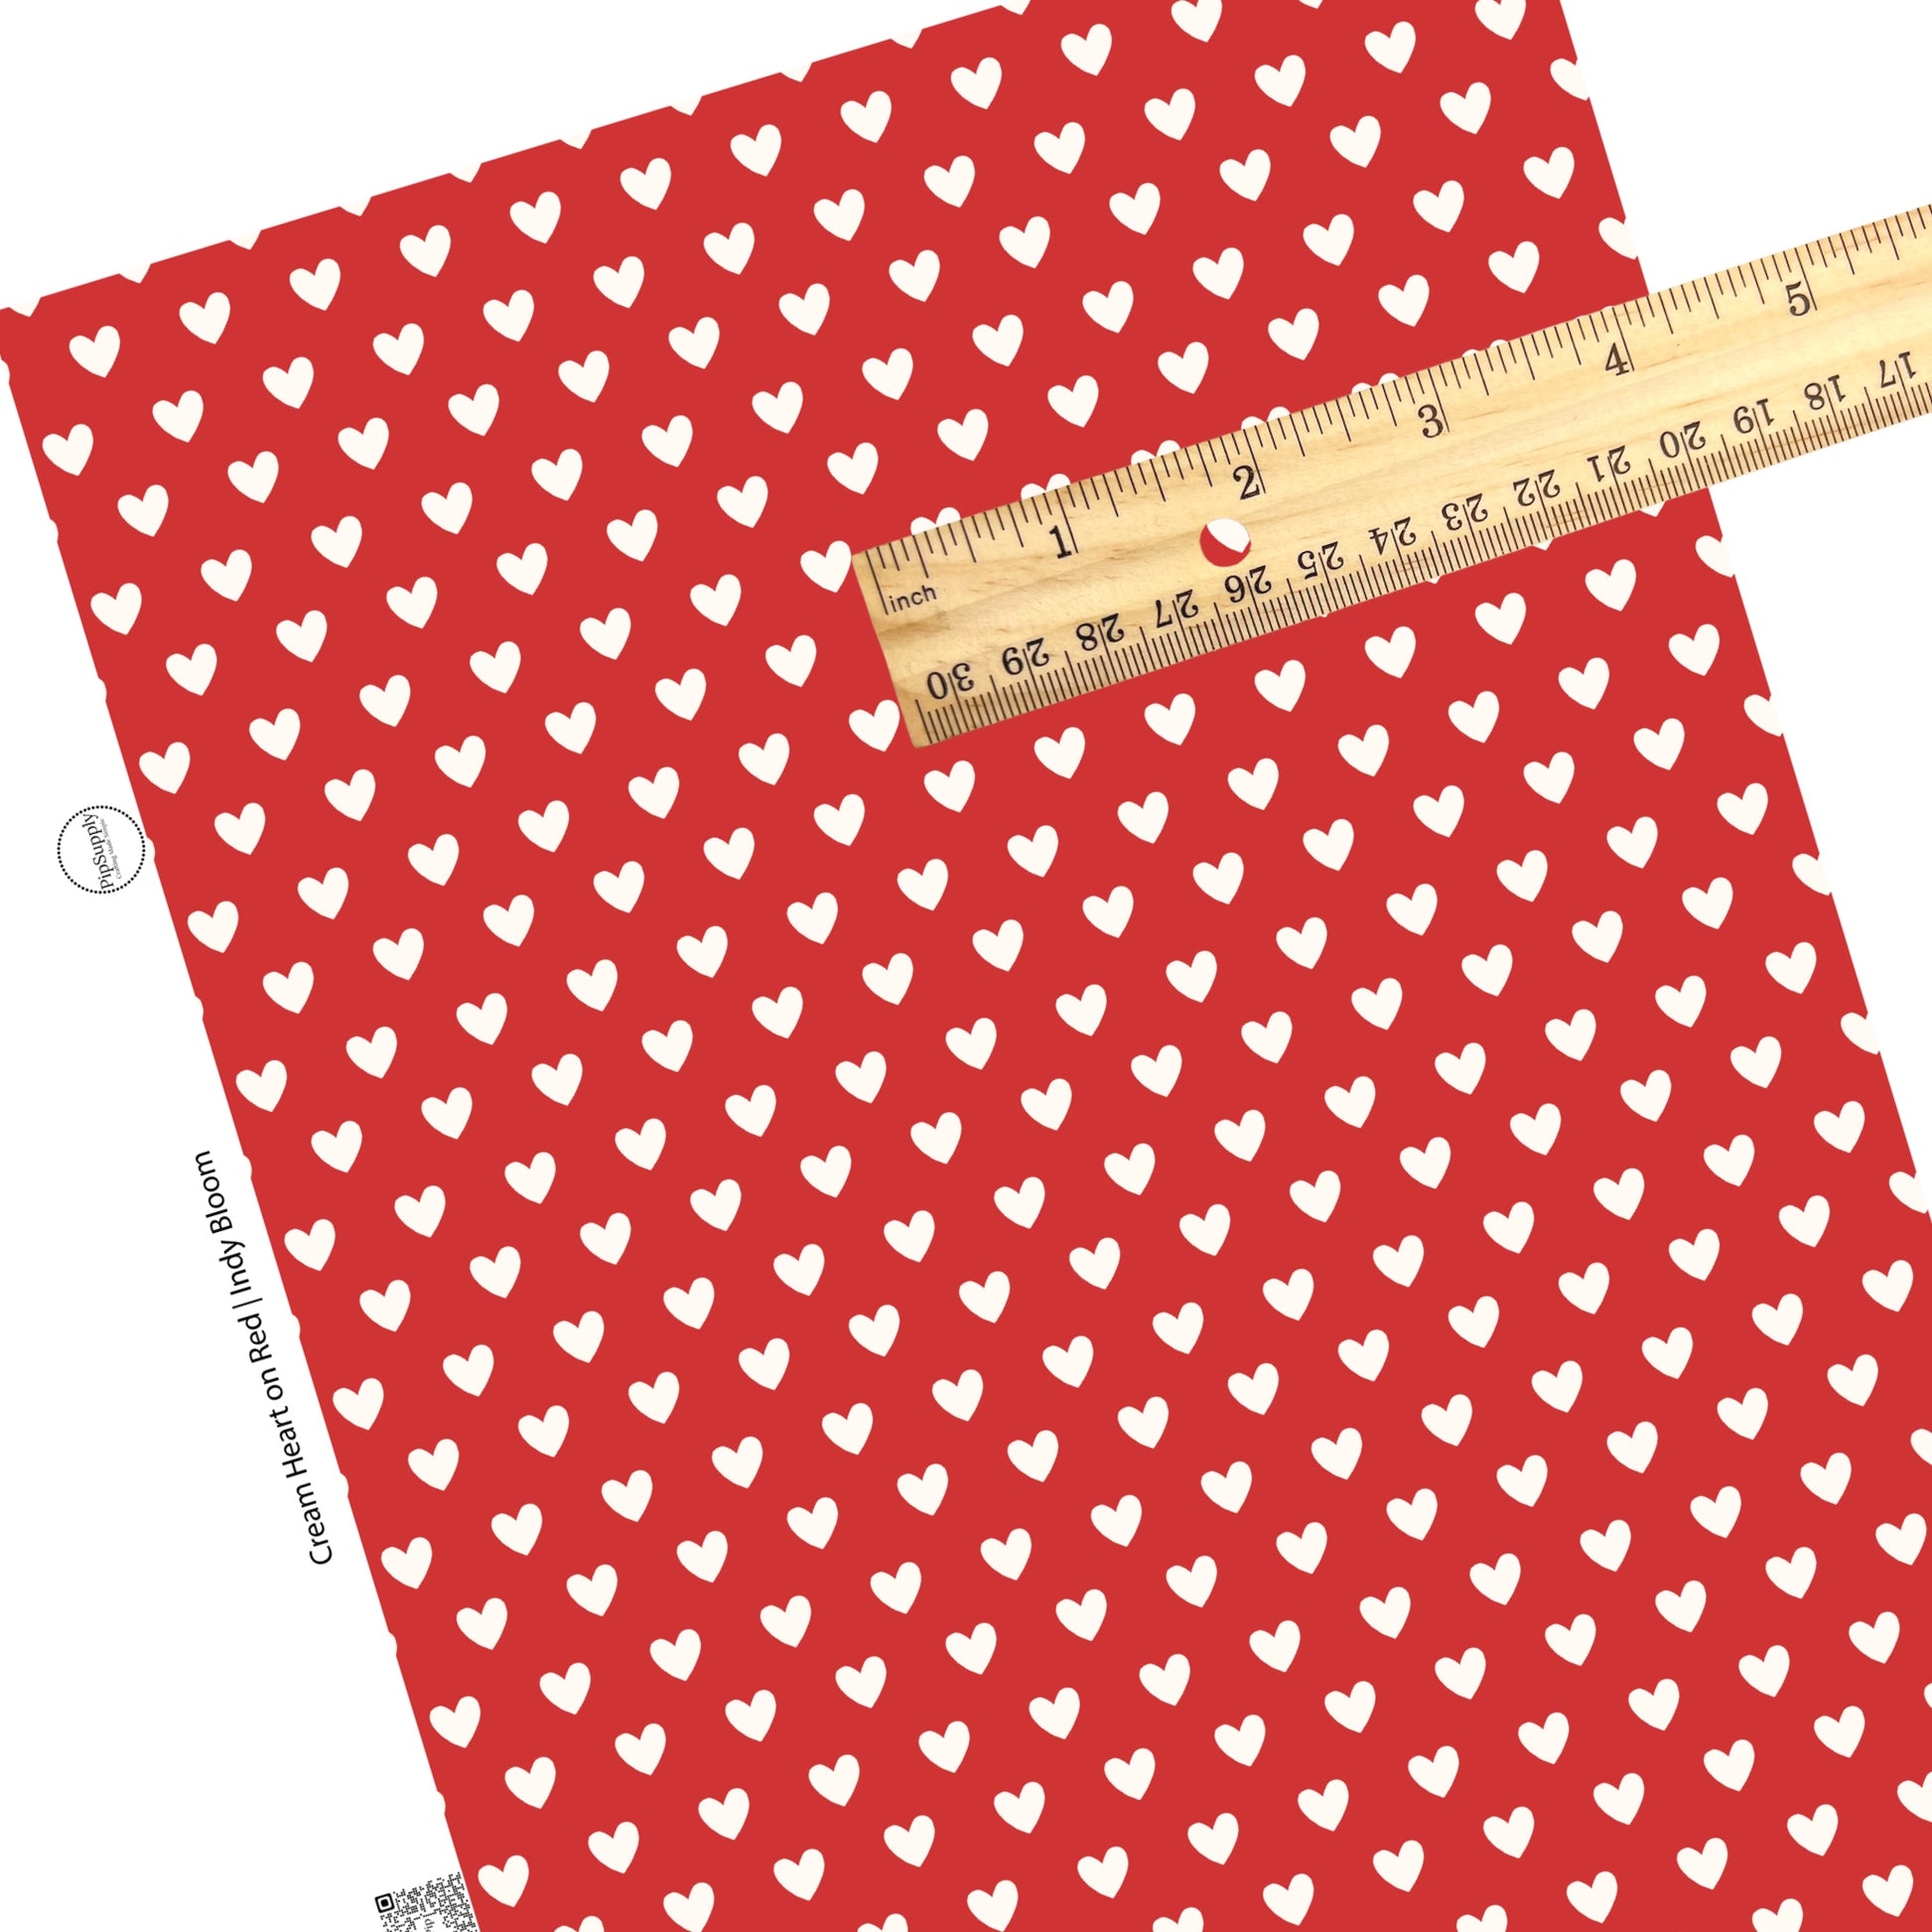 These Valentine's pattern themed faux leather sheets contain the following design elements: white hearts on red. Our CPSIA compliant faux leather sheets or rolls can be used for all types of crafting projects.